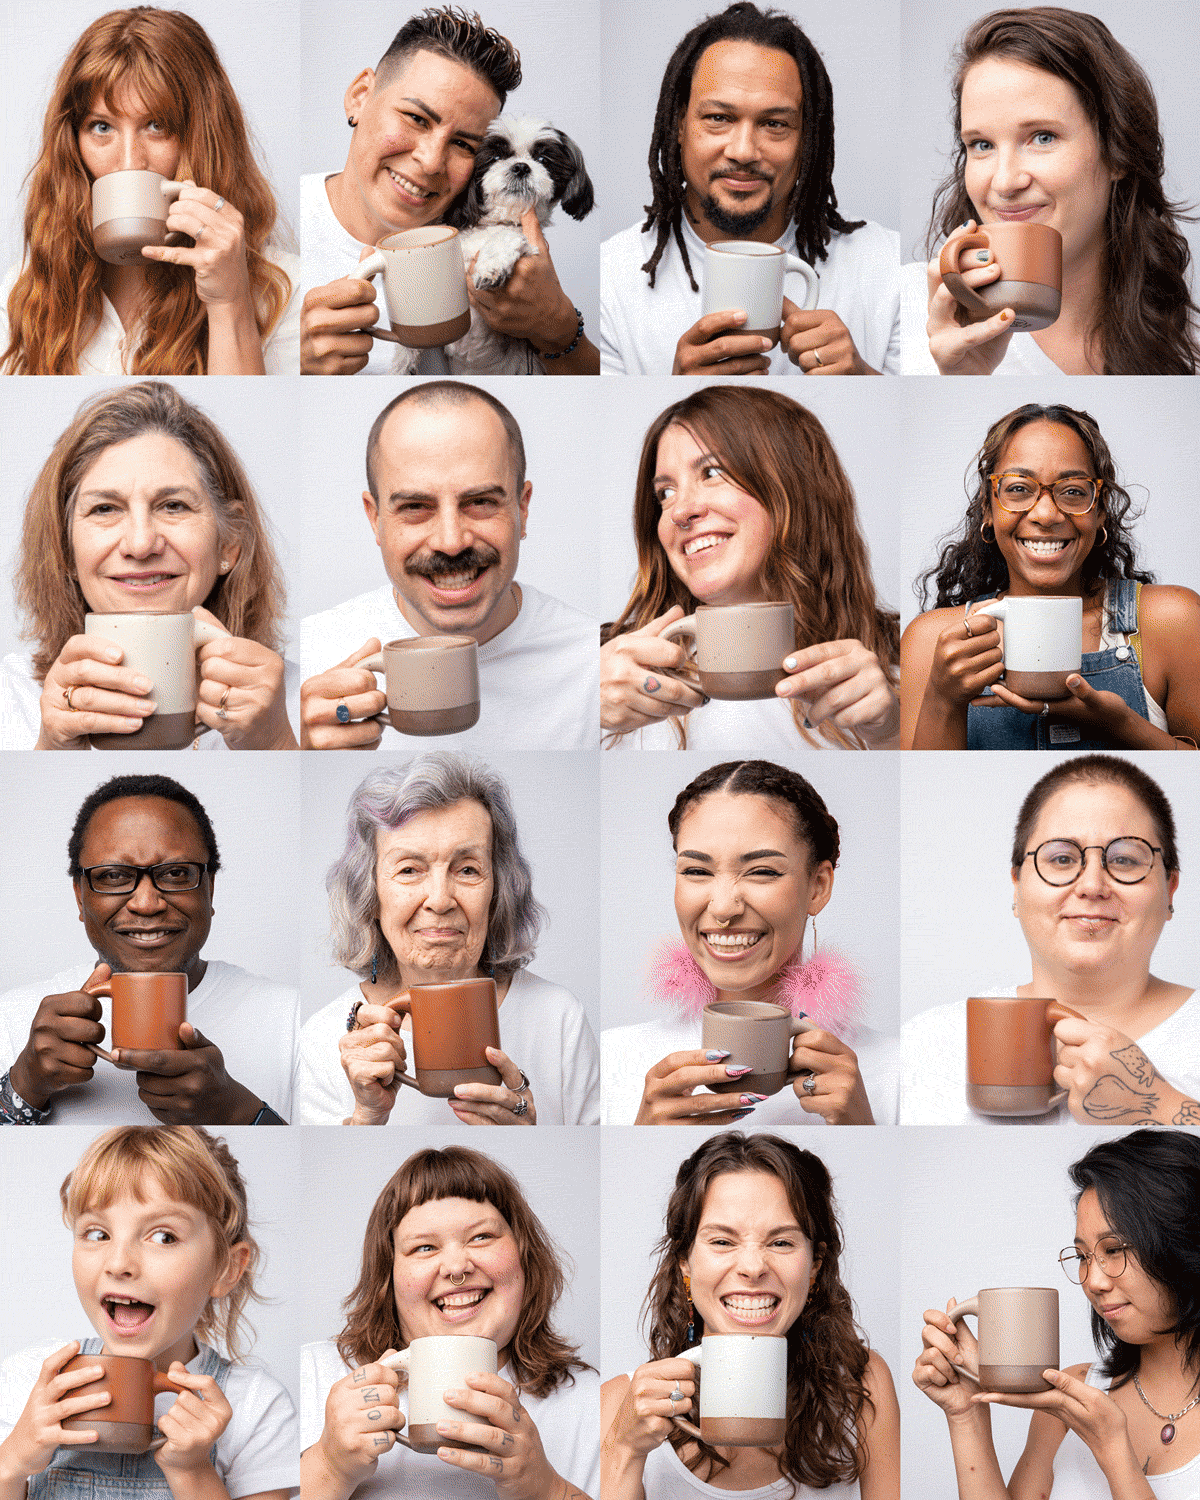 Grid of sixteen images, each of a smiling person holding The Big or Small Mug in a variety of glazes